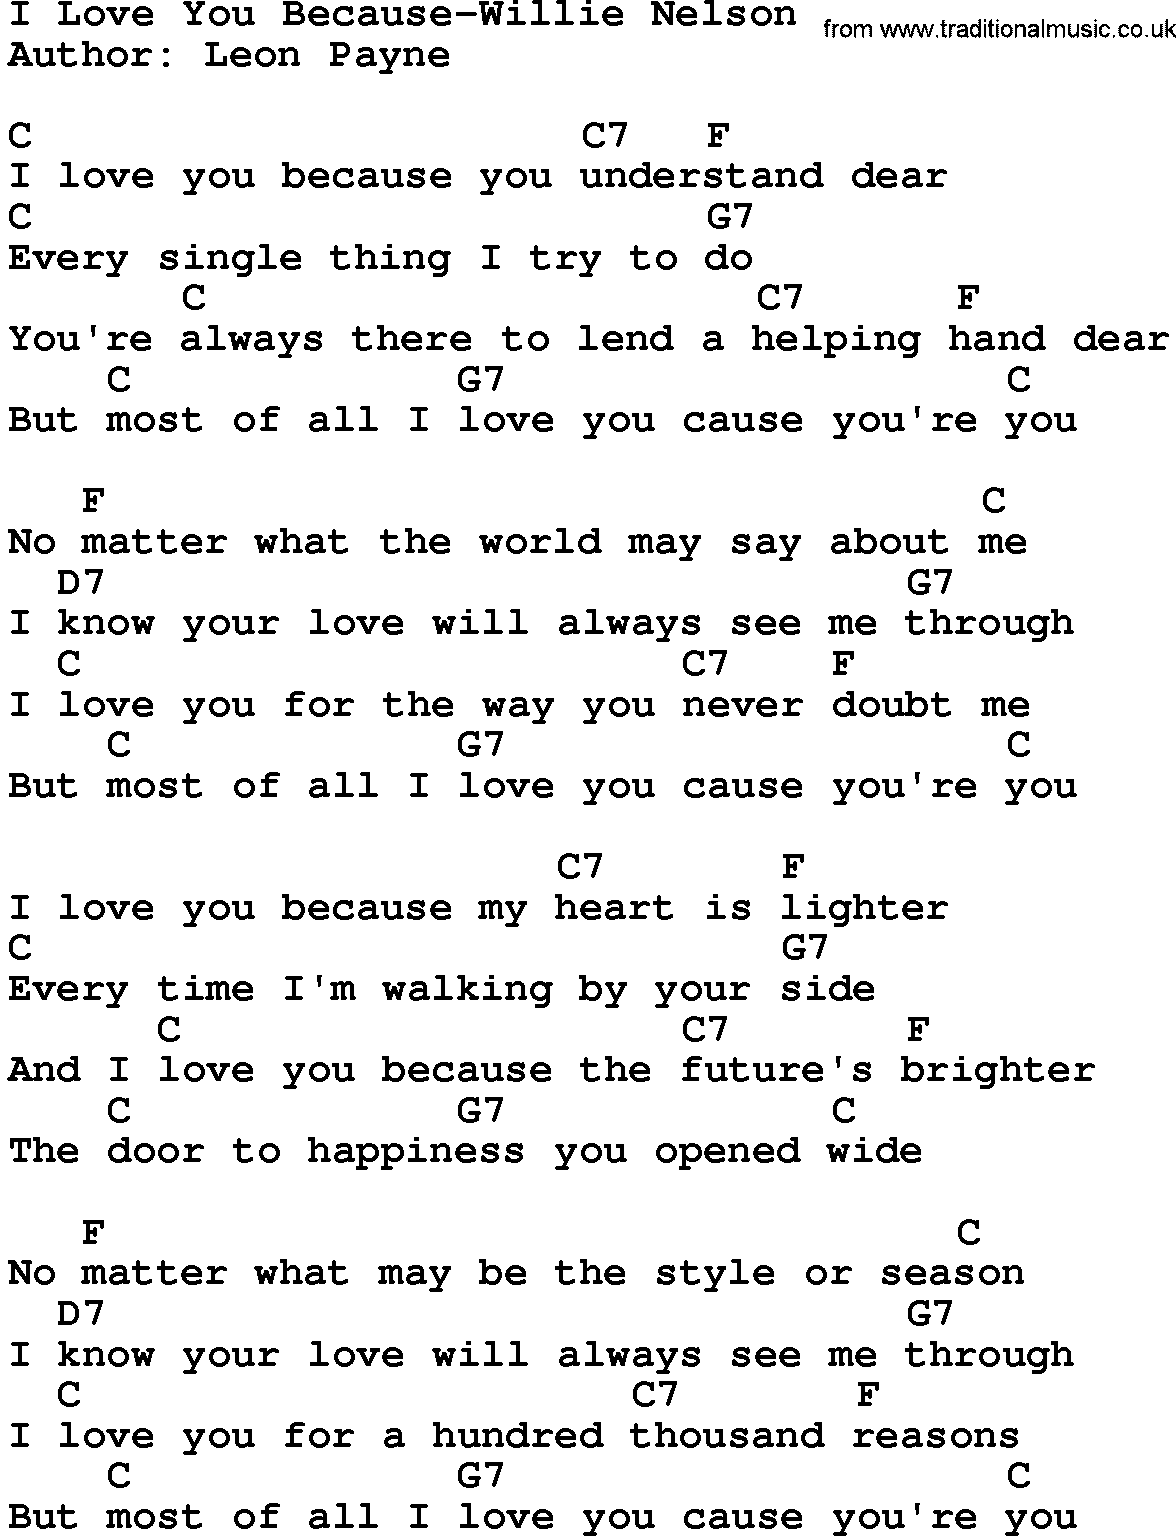 Country music song: I Love You Because-Willie Nelson lyrics and chords